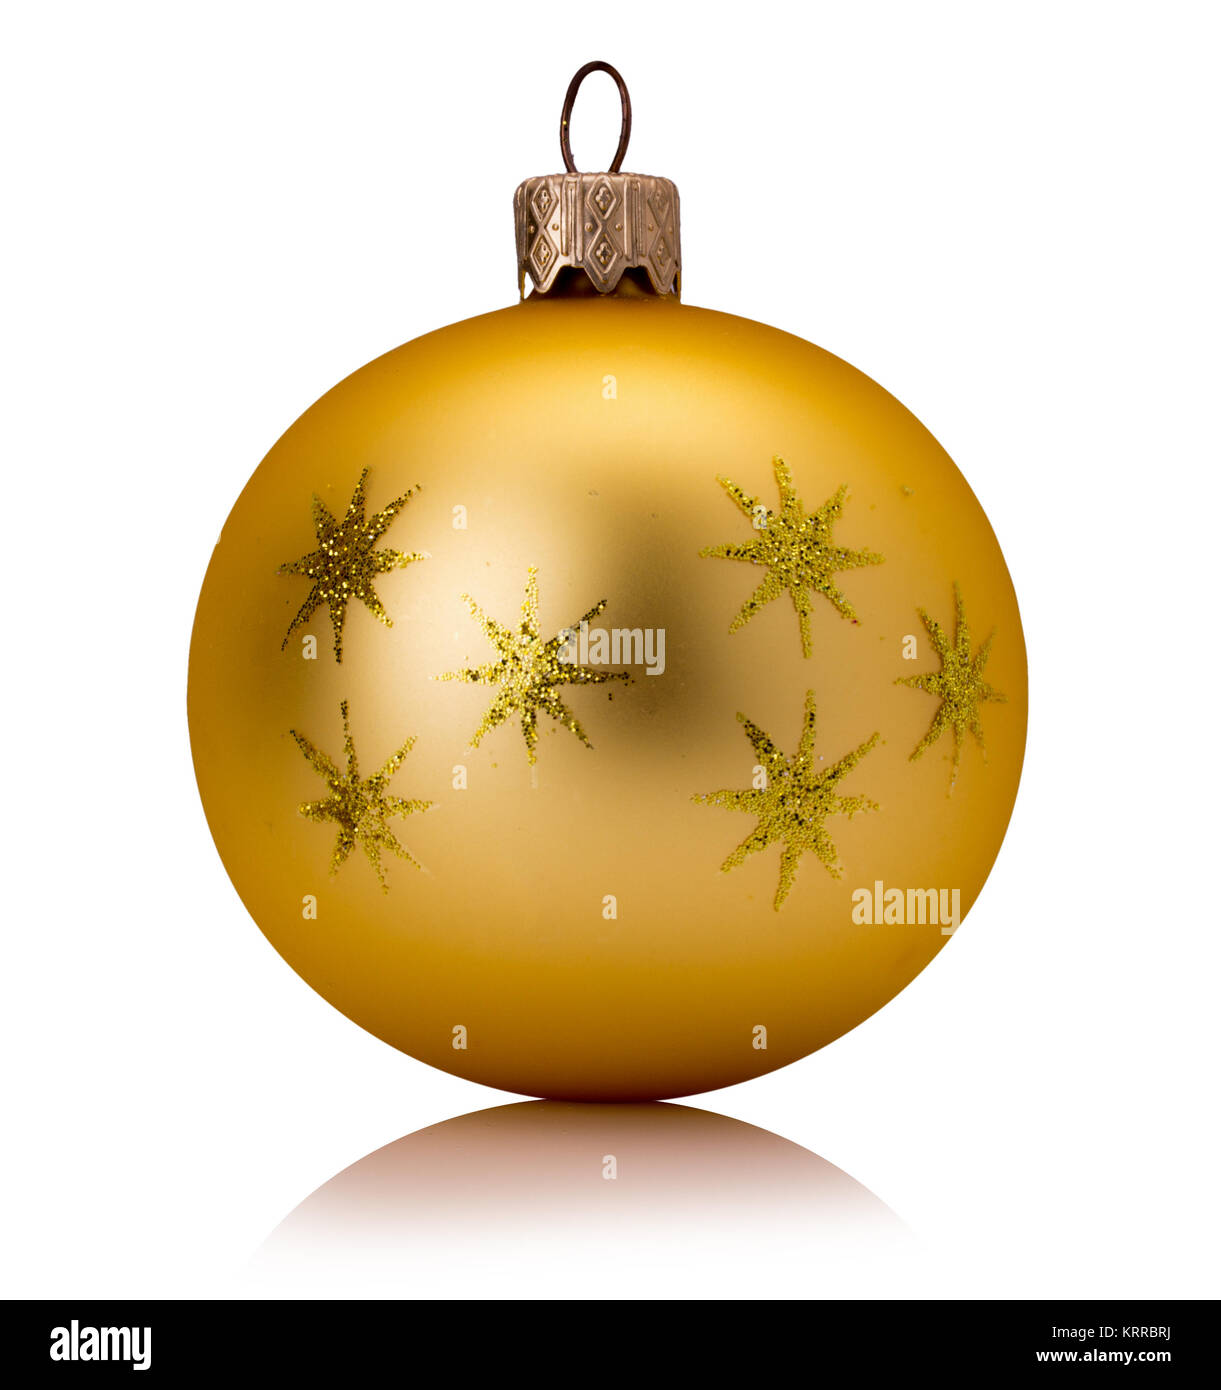 golden Christmas tree ball isolated on a white background. Stock Photo